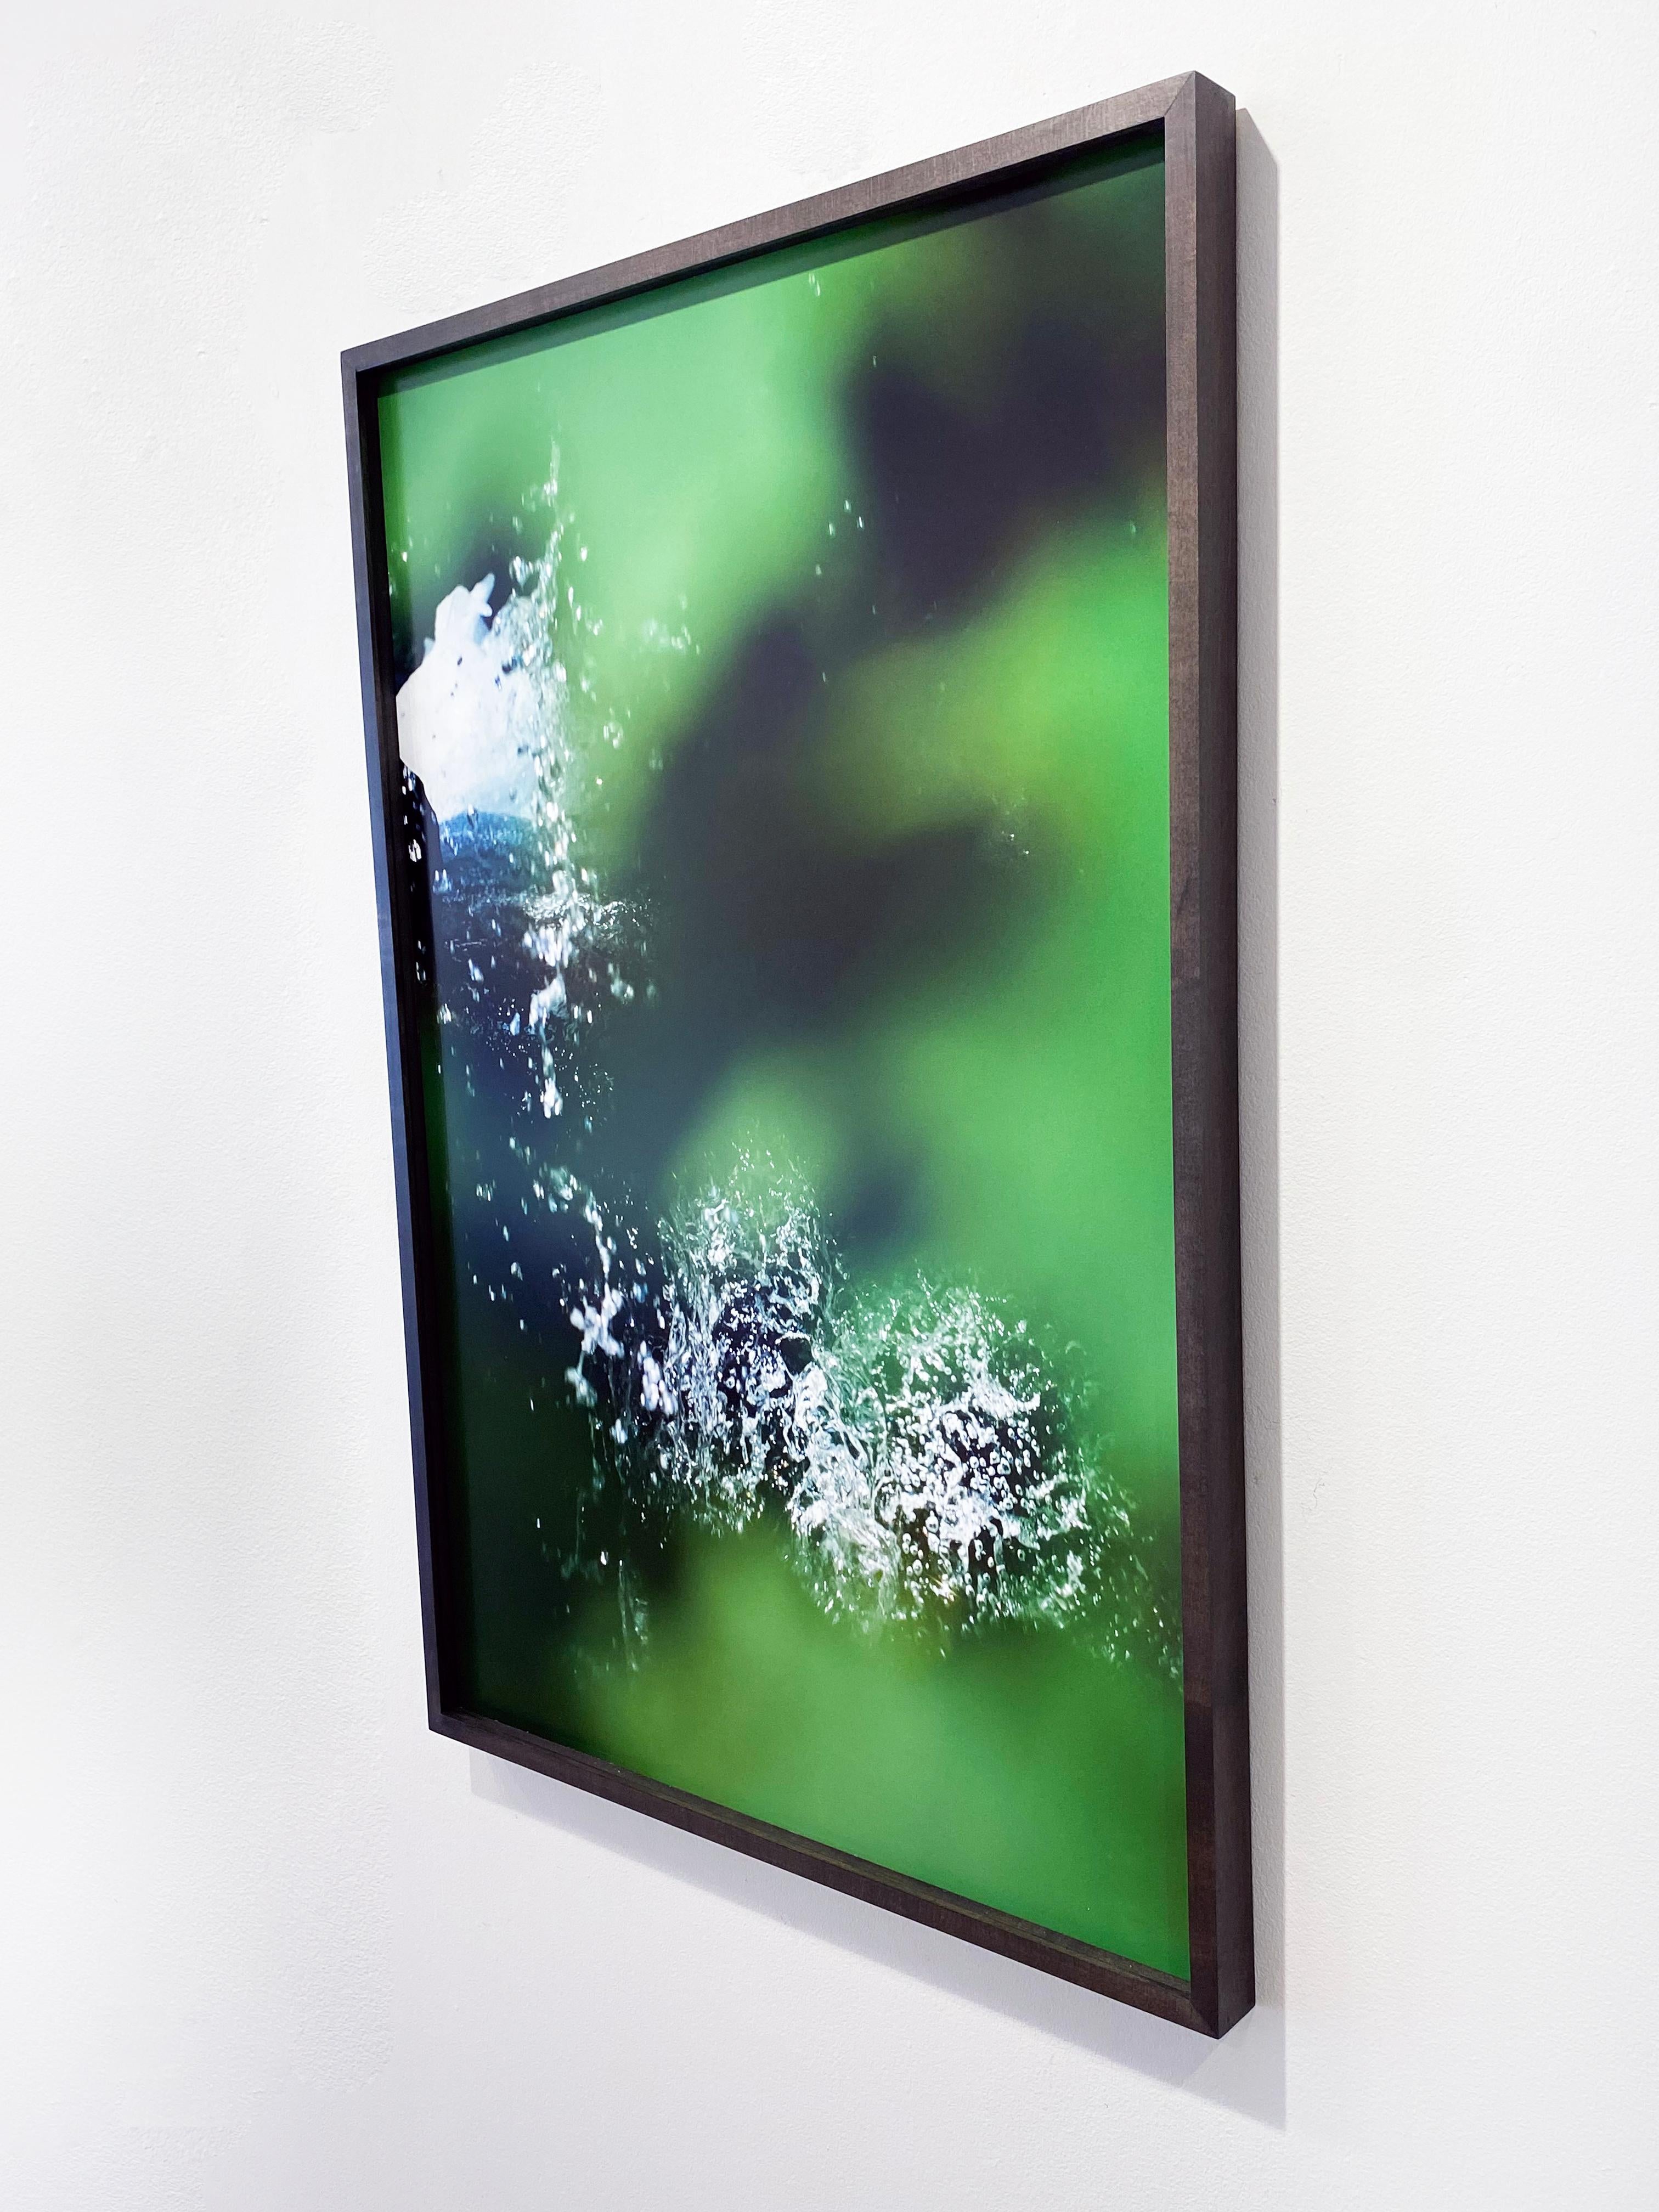 '8.8.16_1:34:49' 2020 by New York, contemporary camera artist Susan Wides. Pigmented ink print, Ed. of 5, 36 x 24 in. / Frame: 36.75 x 24.75 in. This color photograph features an abstracted view of water and leaves in a dark brown/black frame. Wides